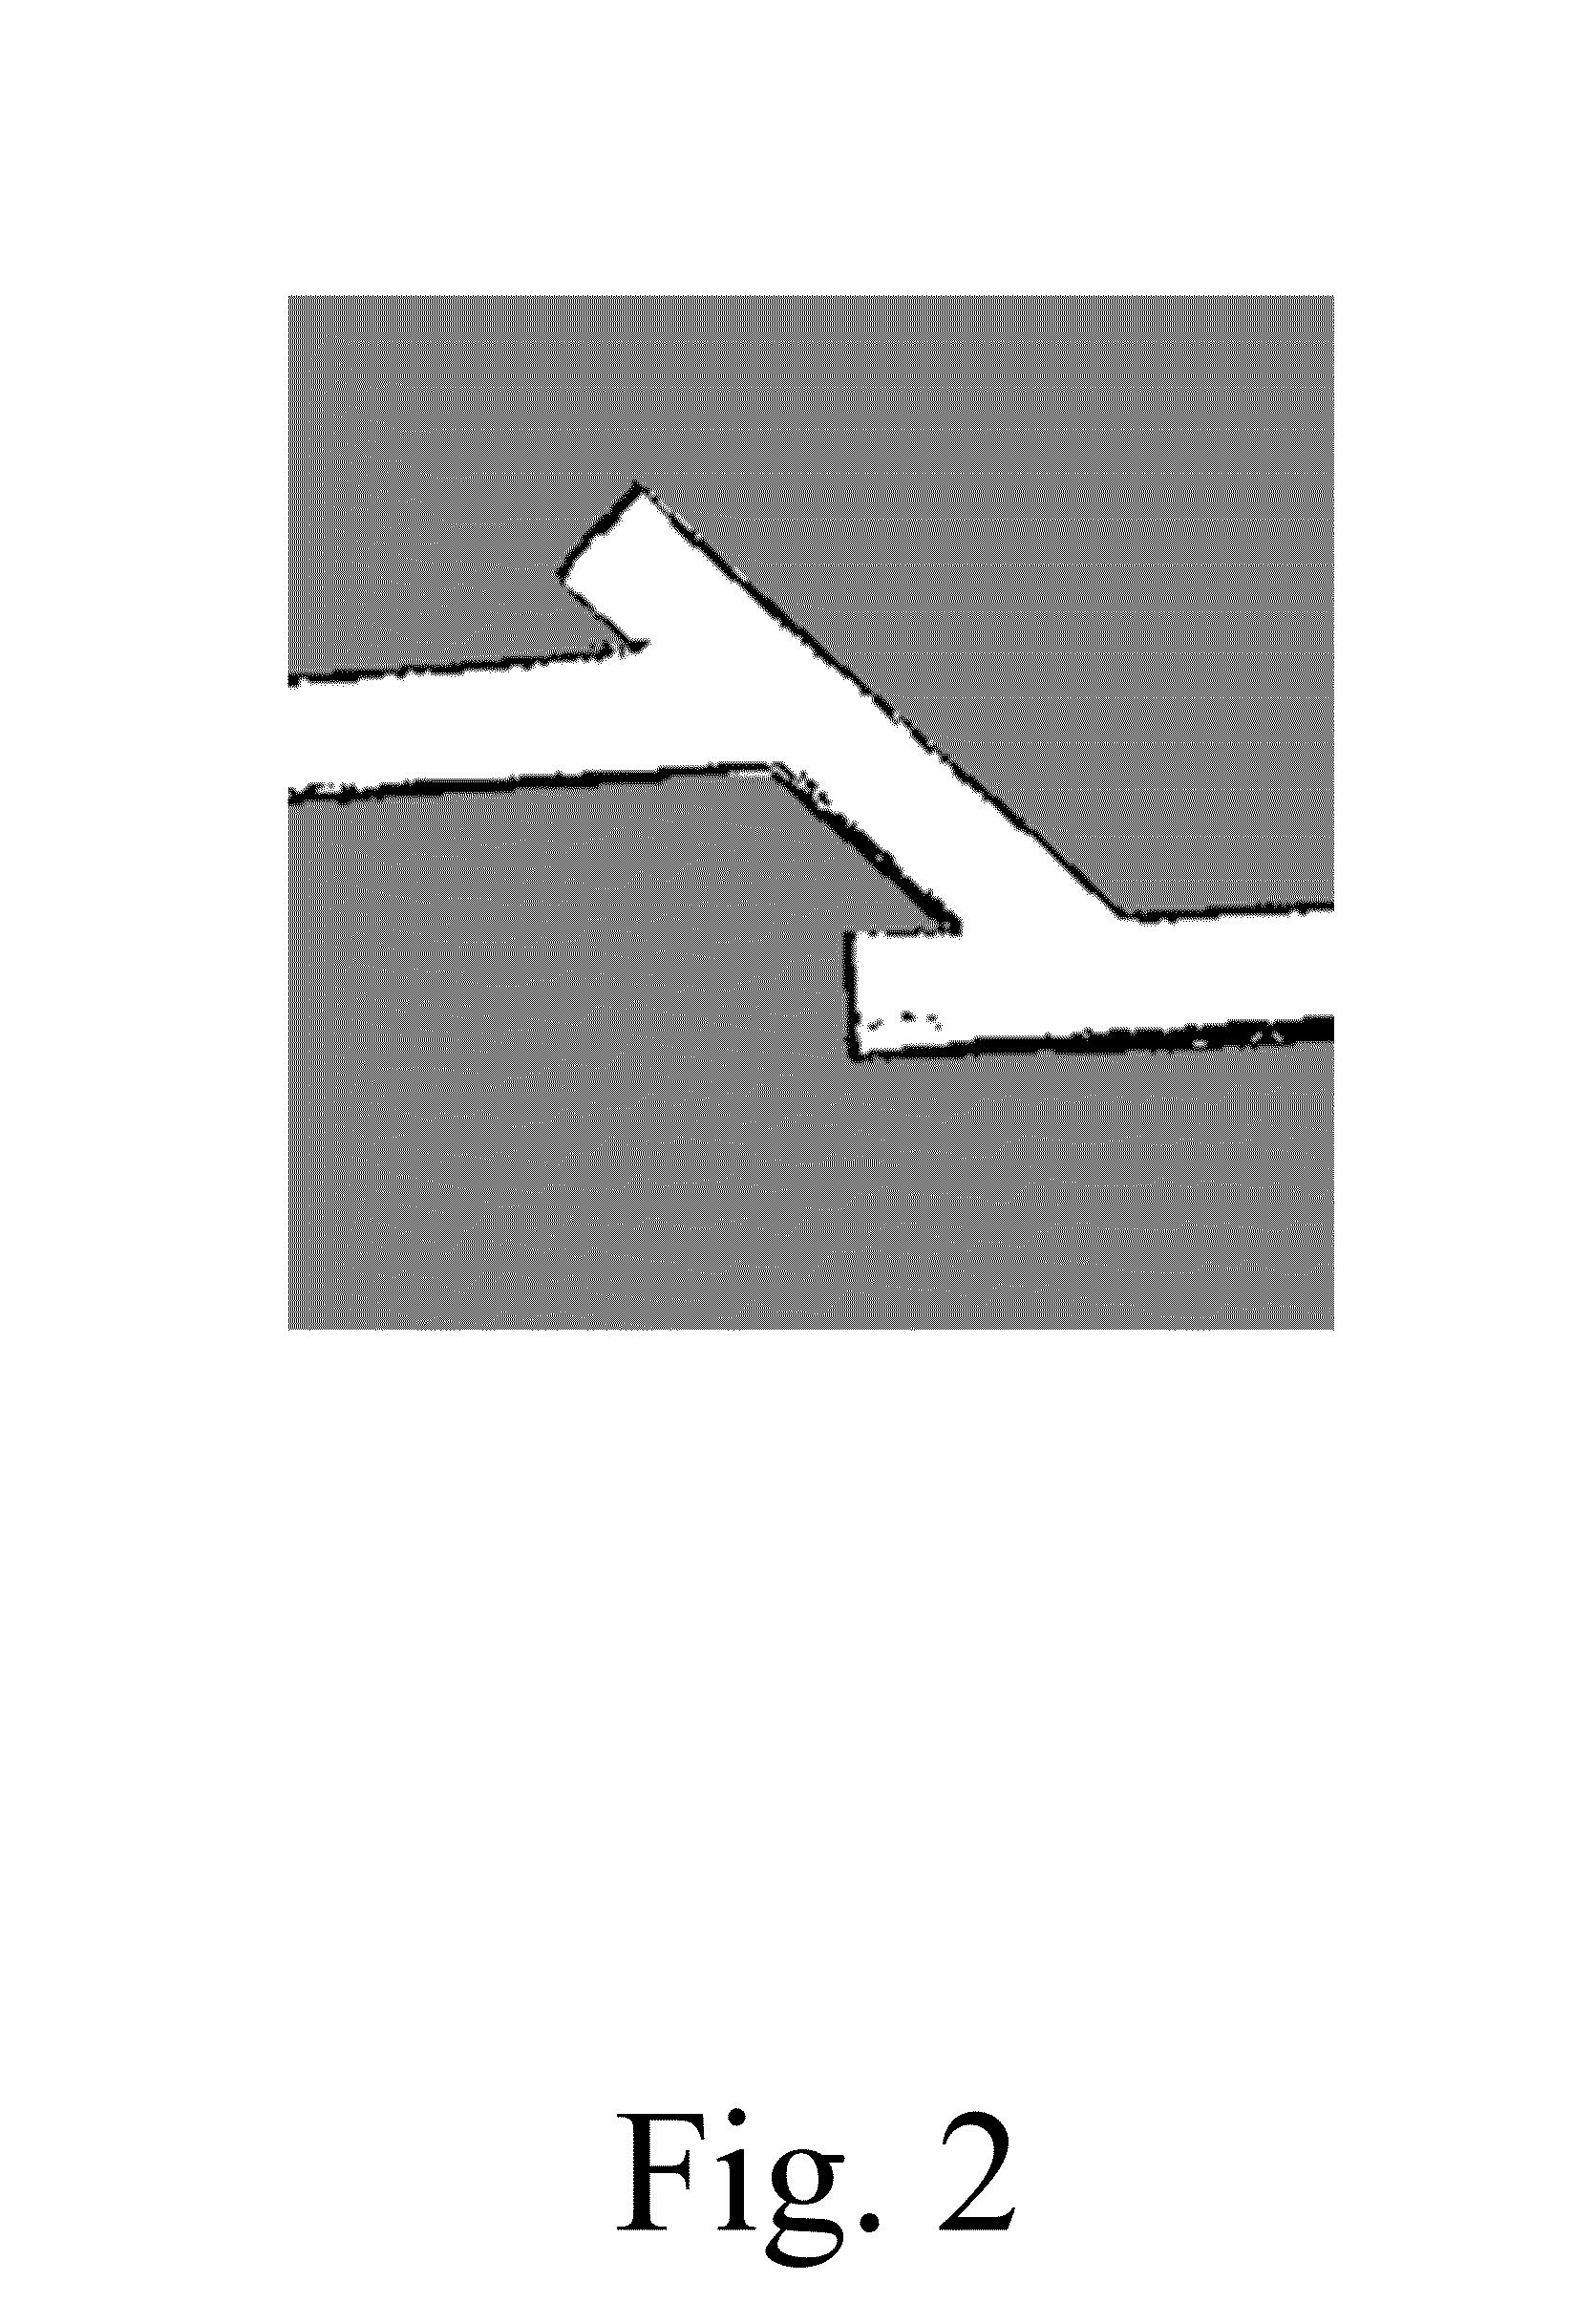 System and Method for Localizing Two or More Moving Nodes